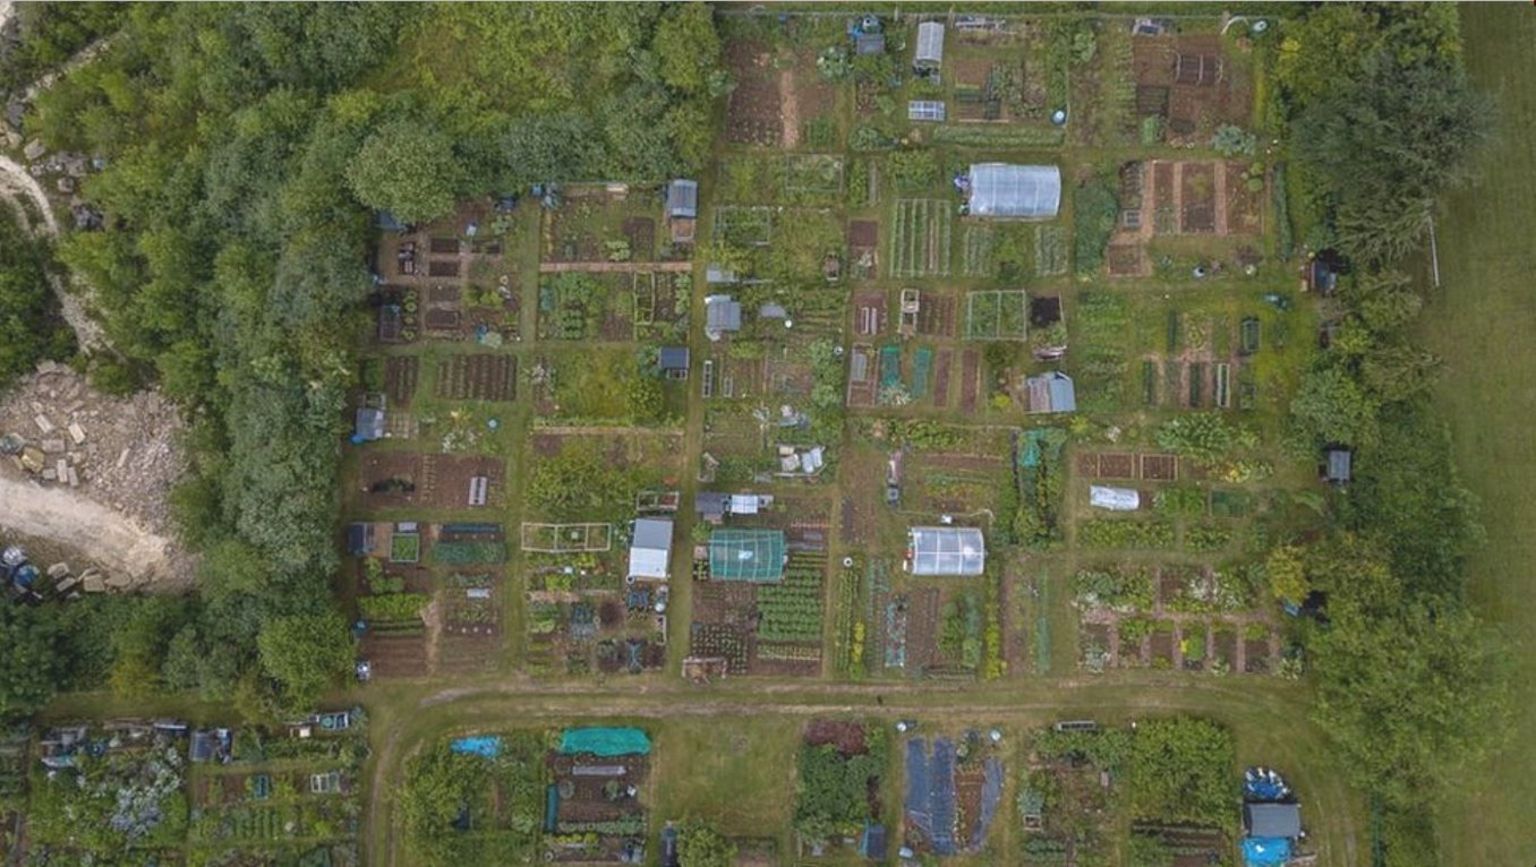 An aerial image of the 64 plots at the allotment site